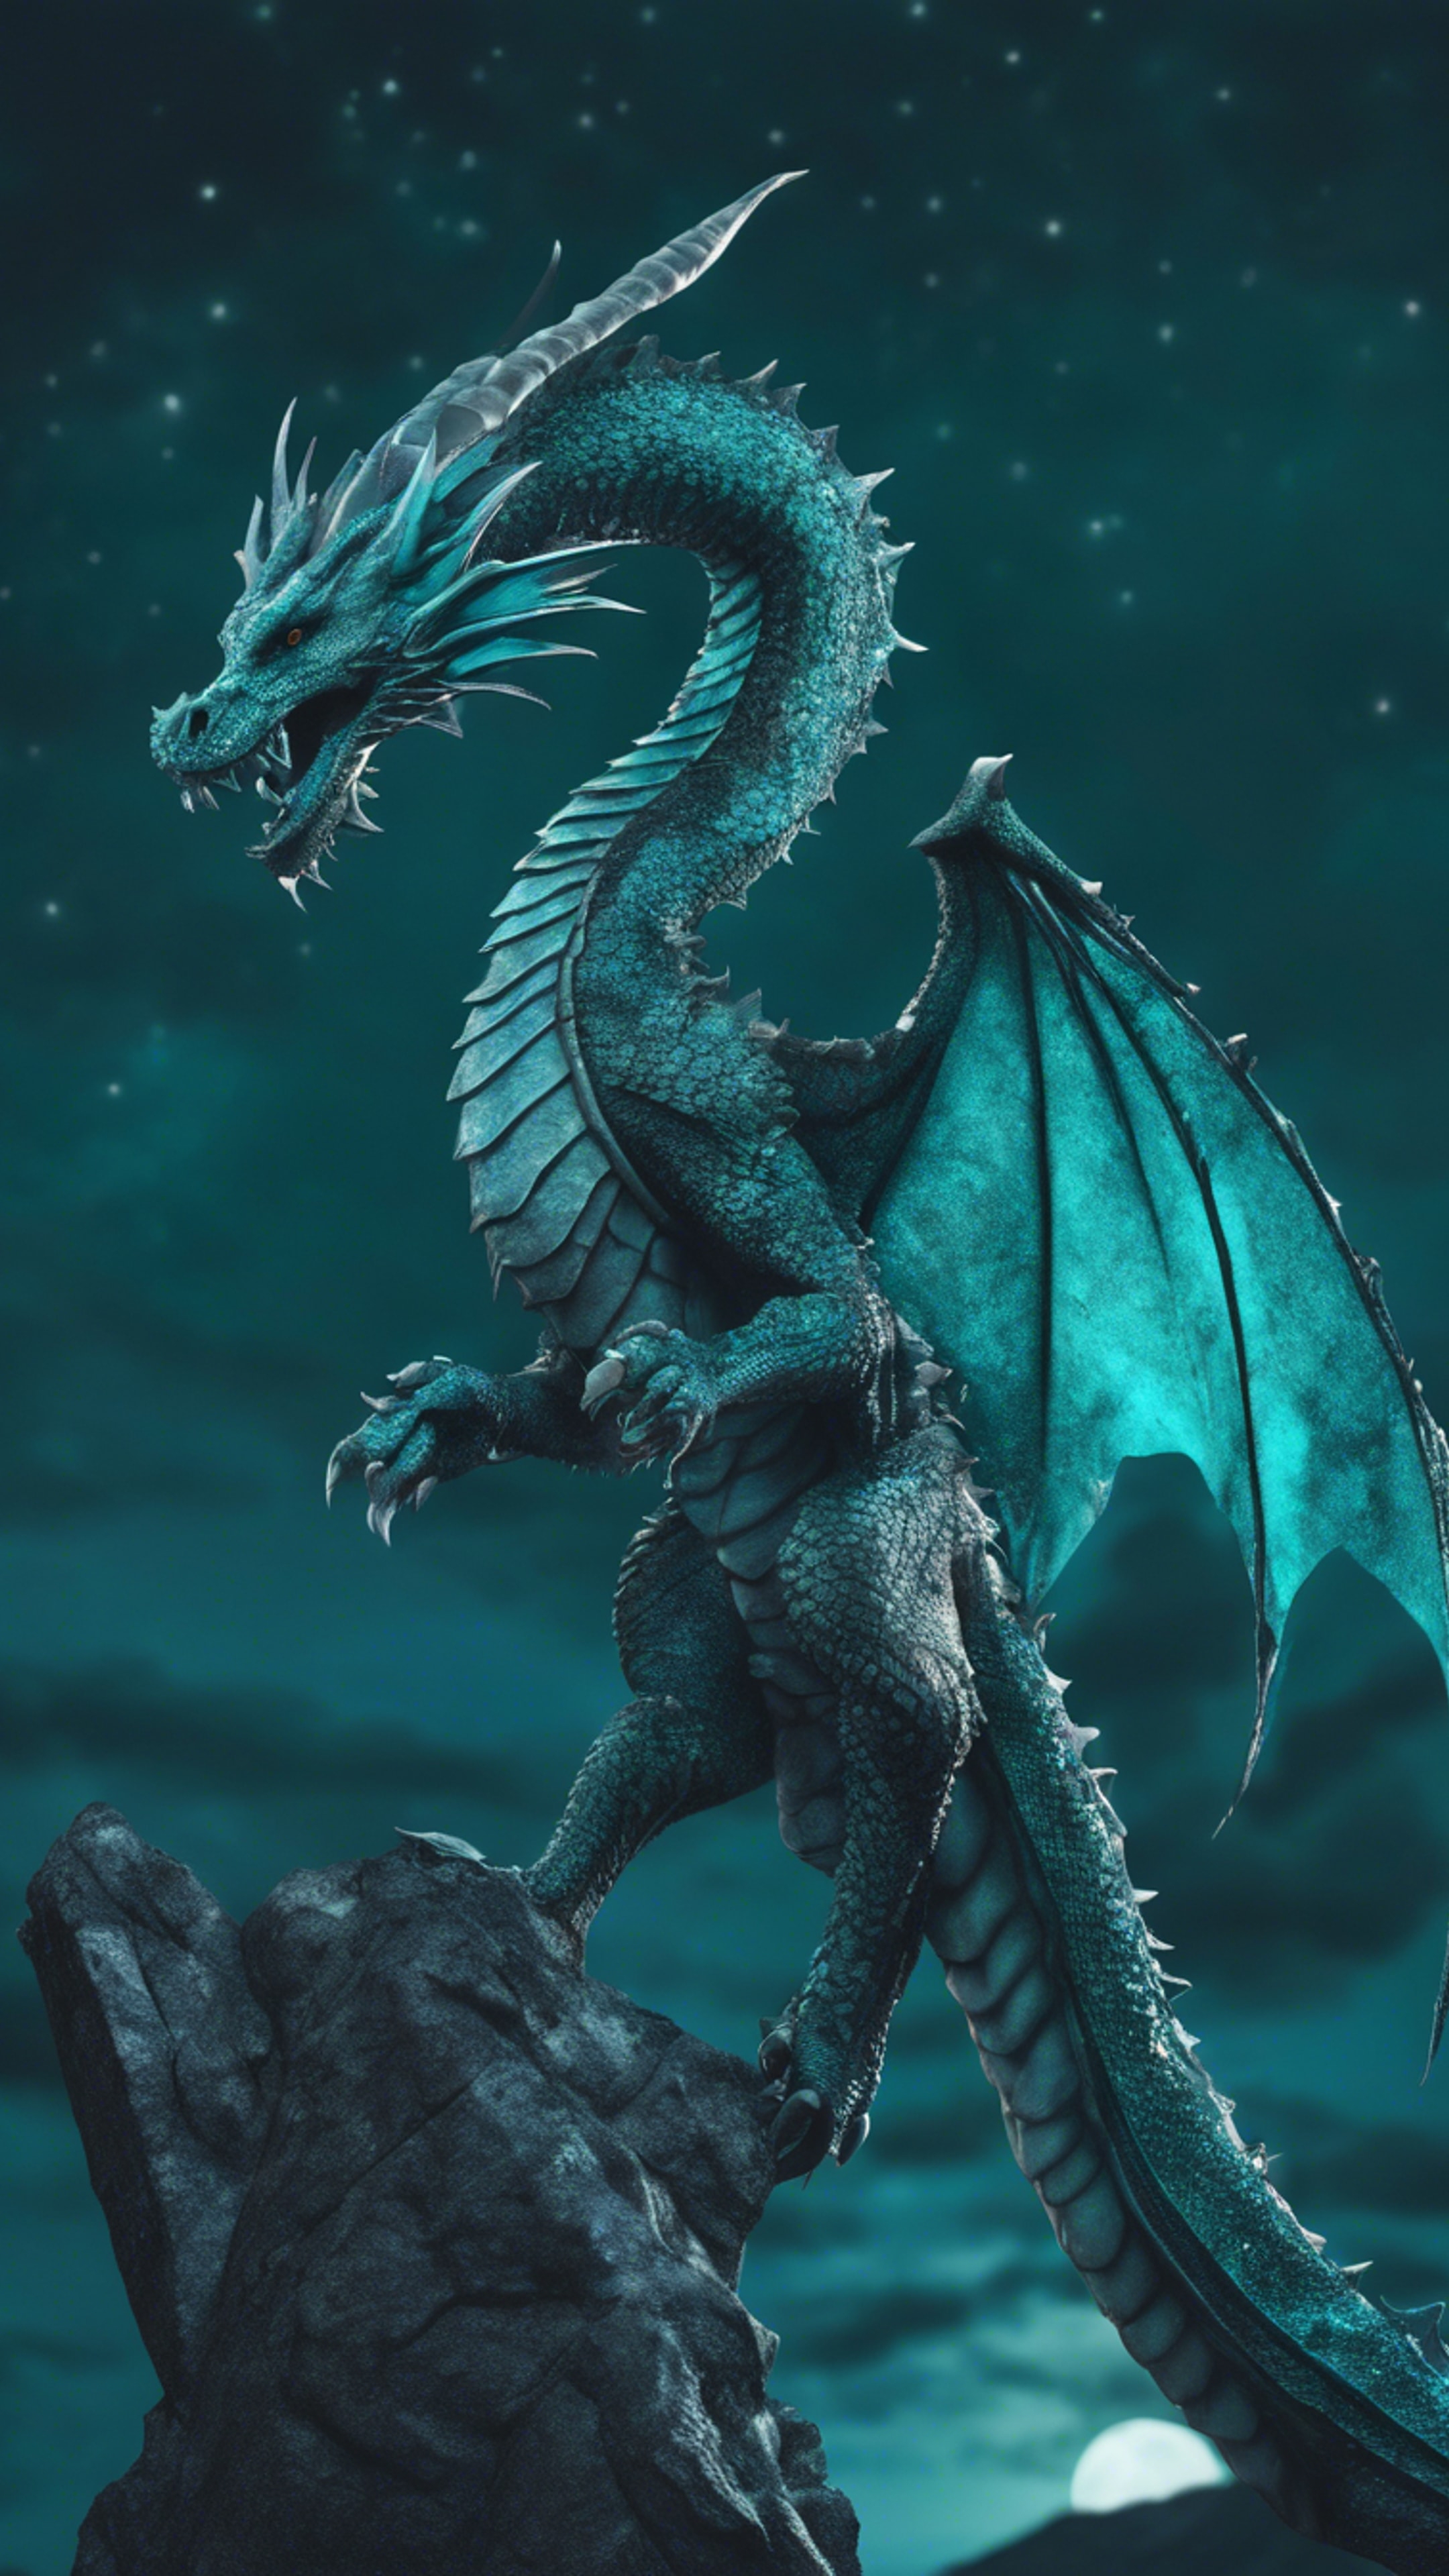 A serpentine Gothic dragon perched on a tall mountain, its teal scales shimmering under the moonlight. Sfondo[91ef634c137e4b1f8ab5]